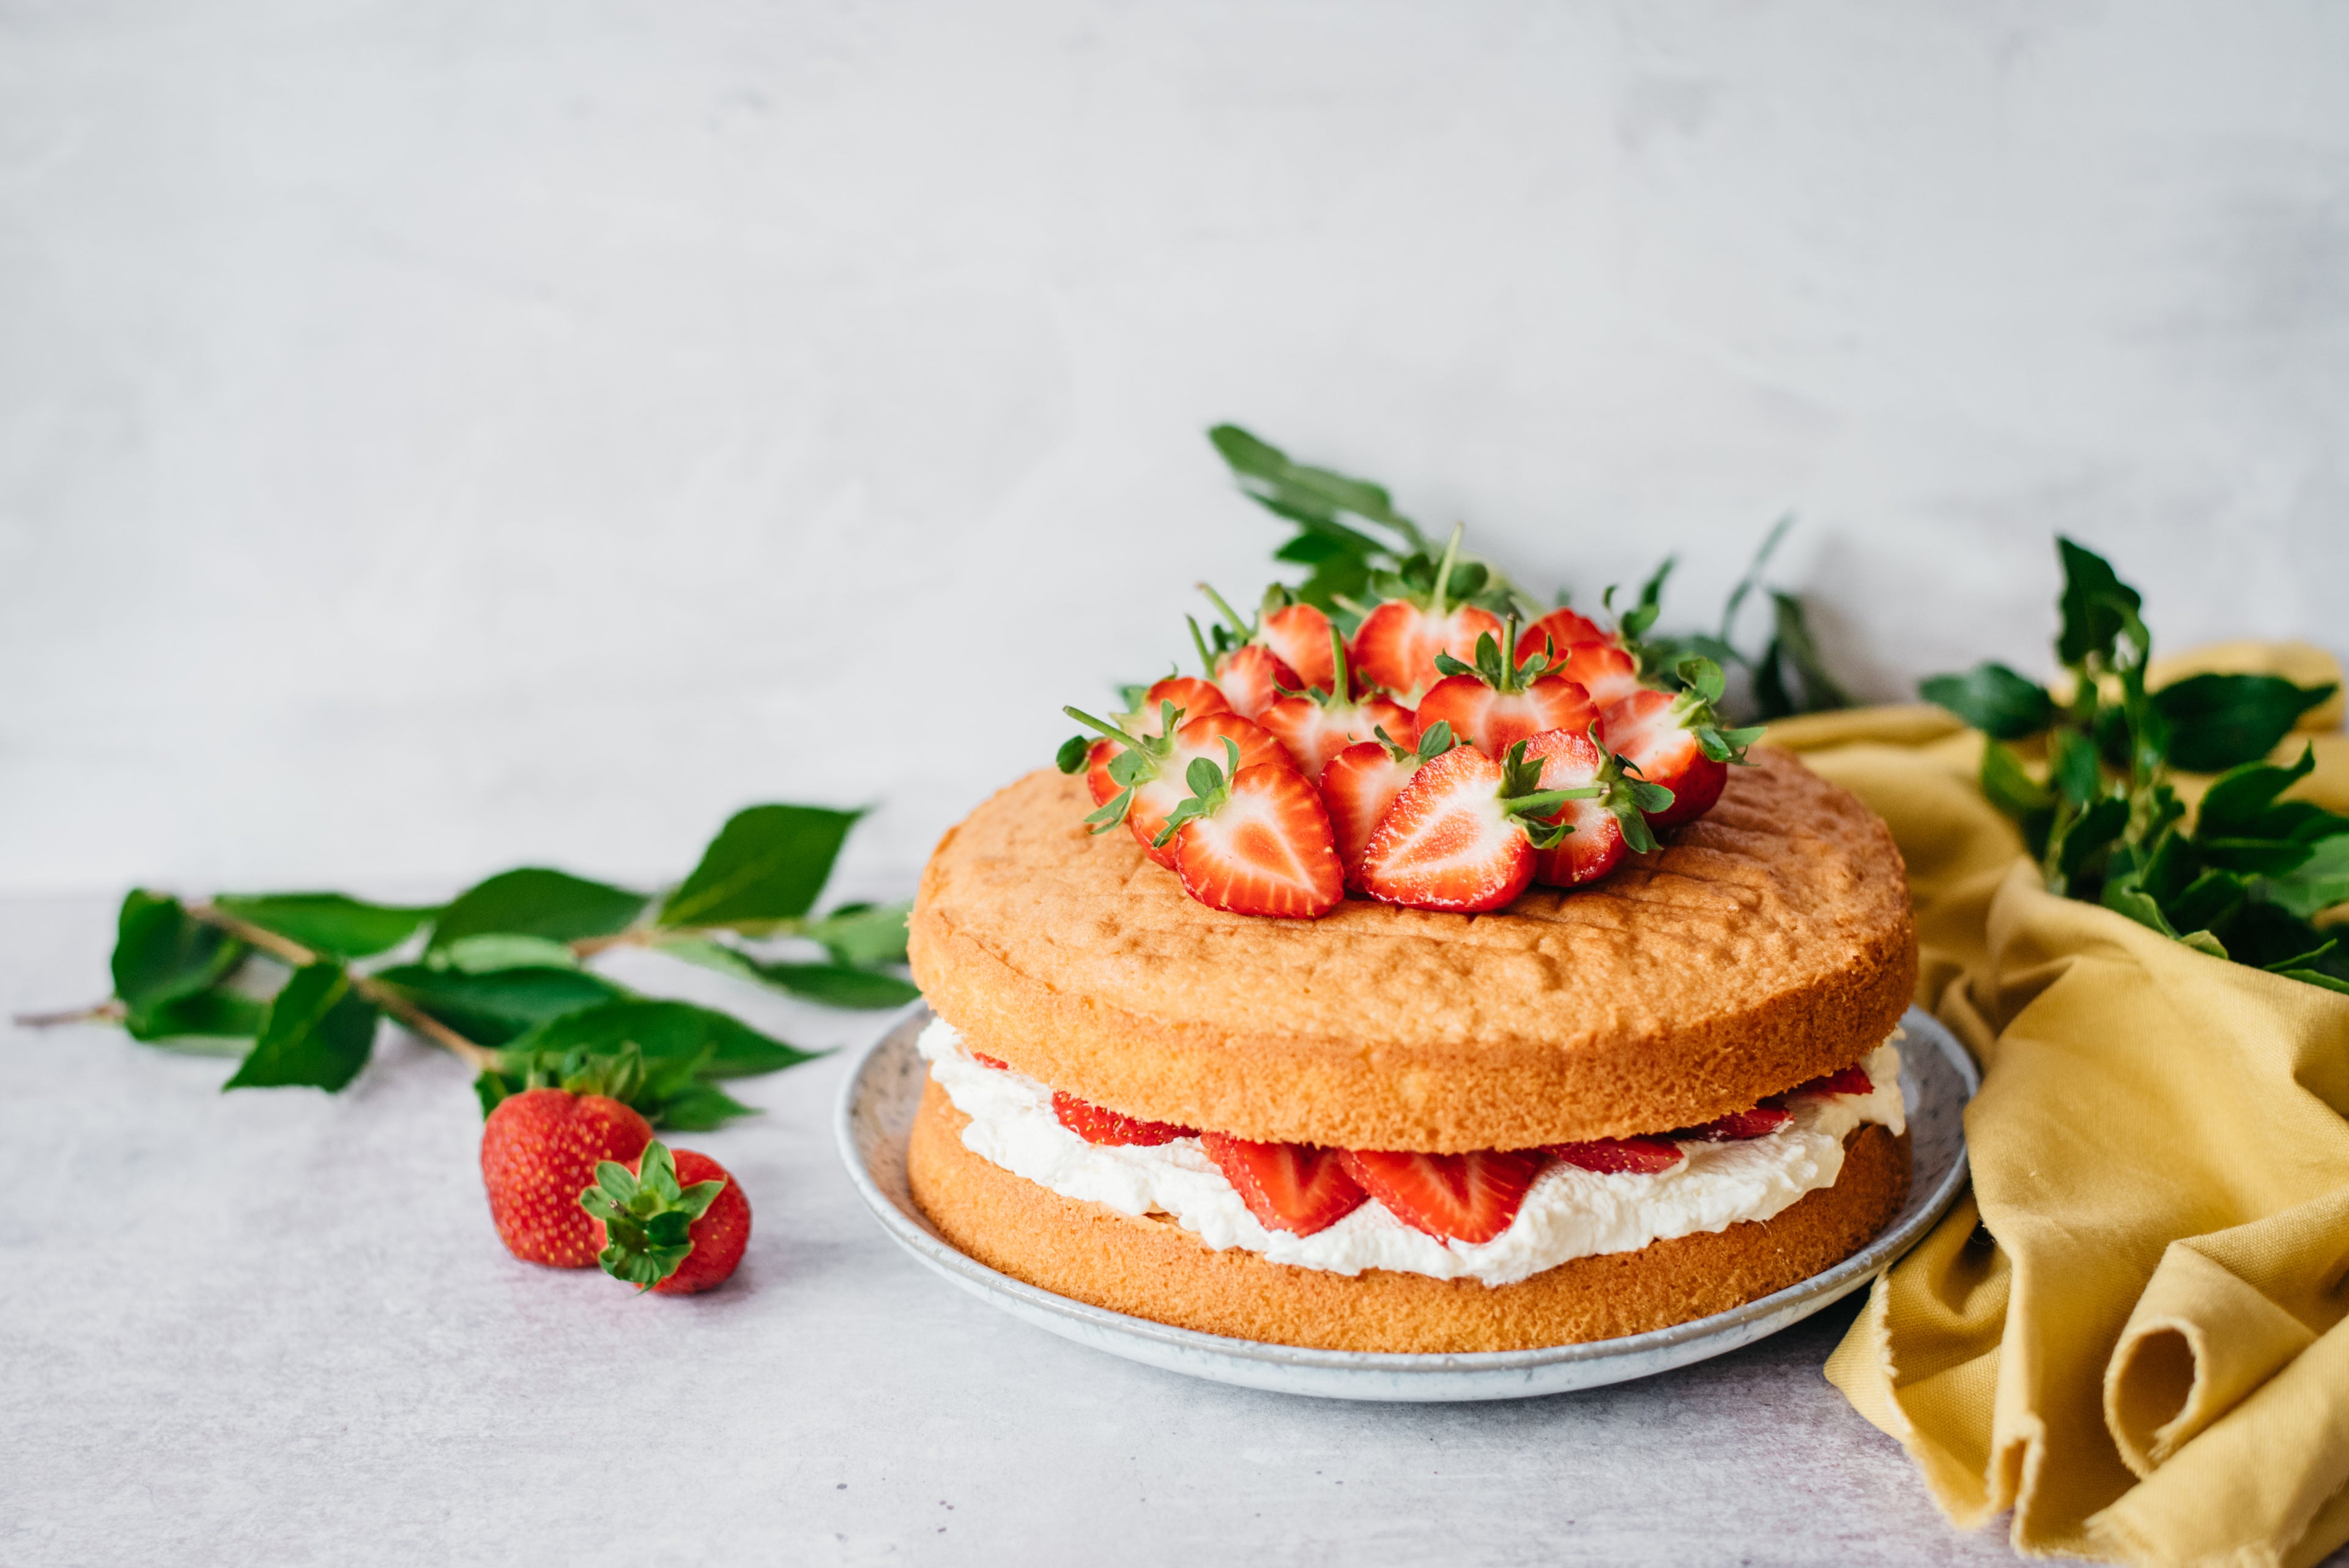 A low sugar victoria sponge cake topped with sliced strawberries